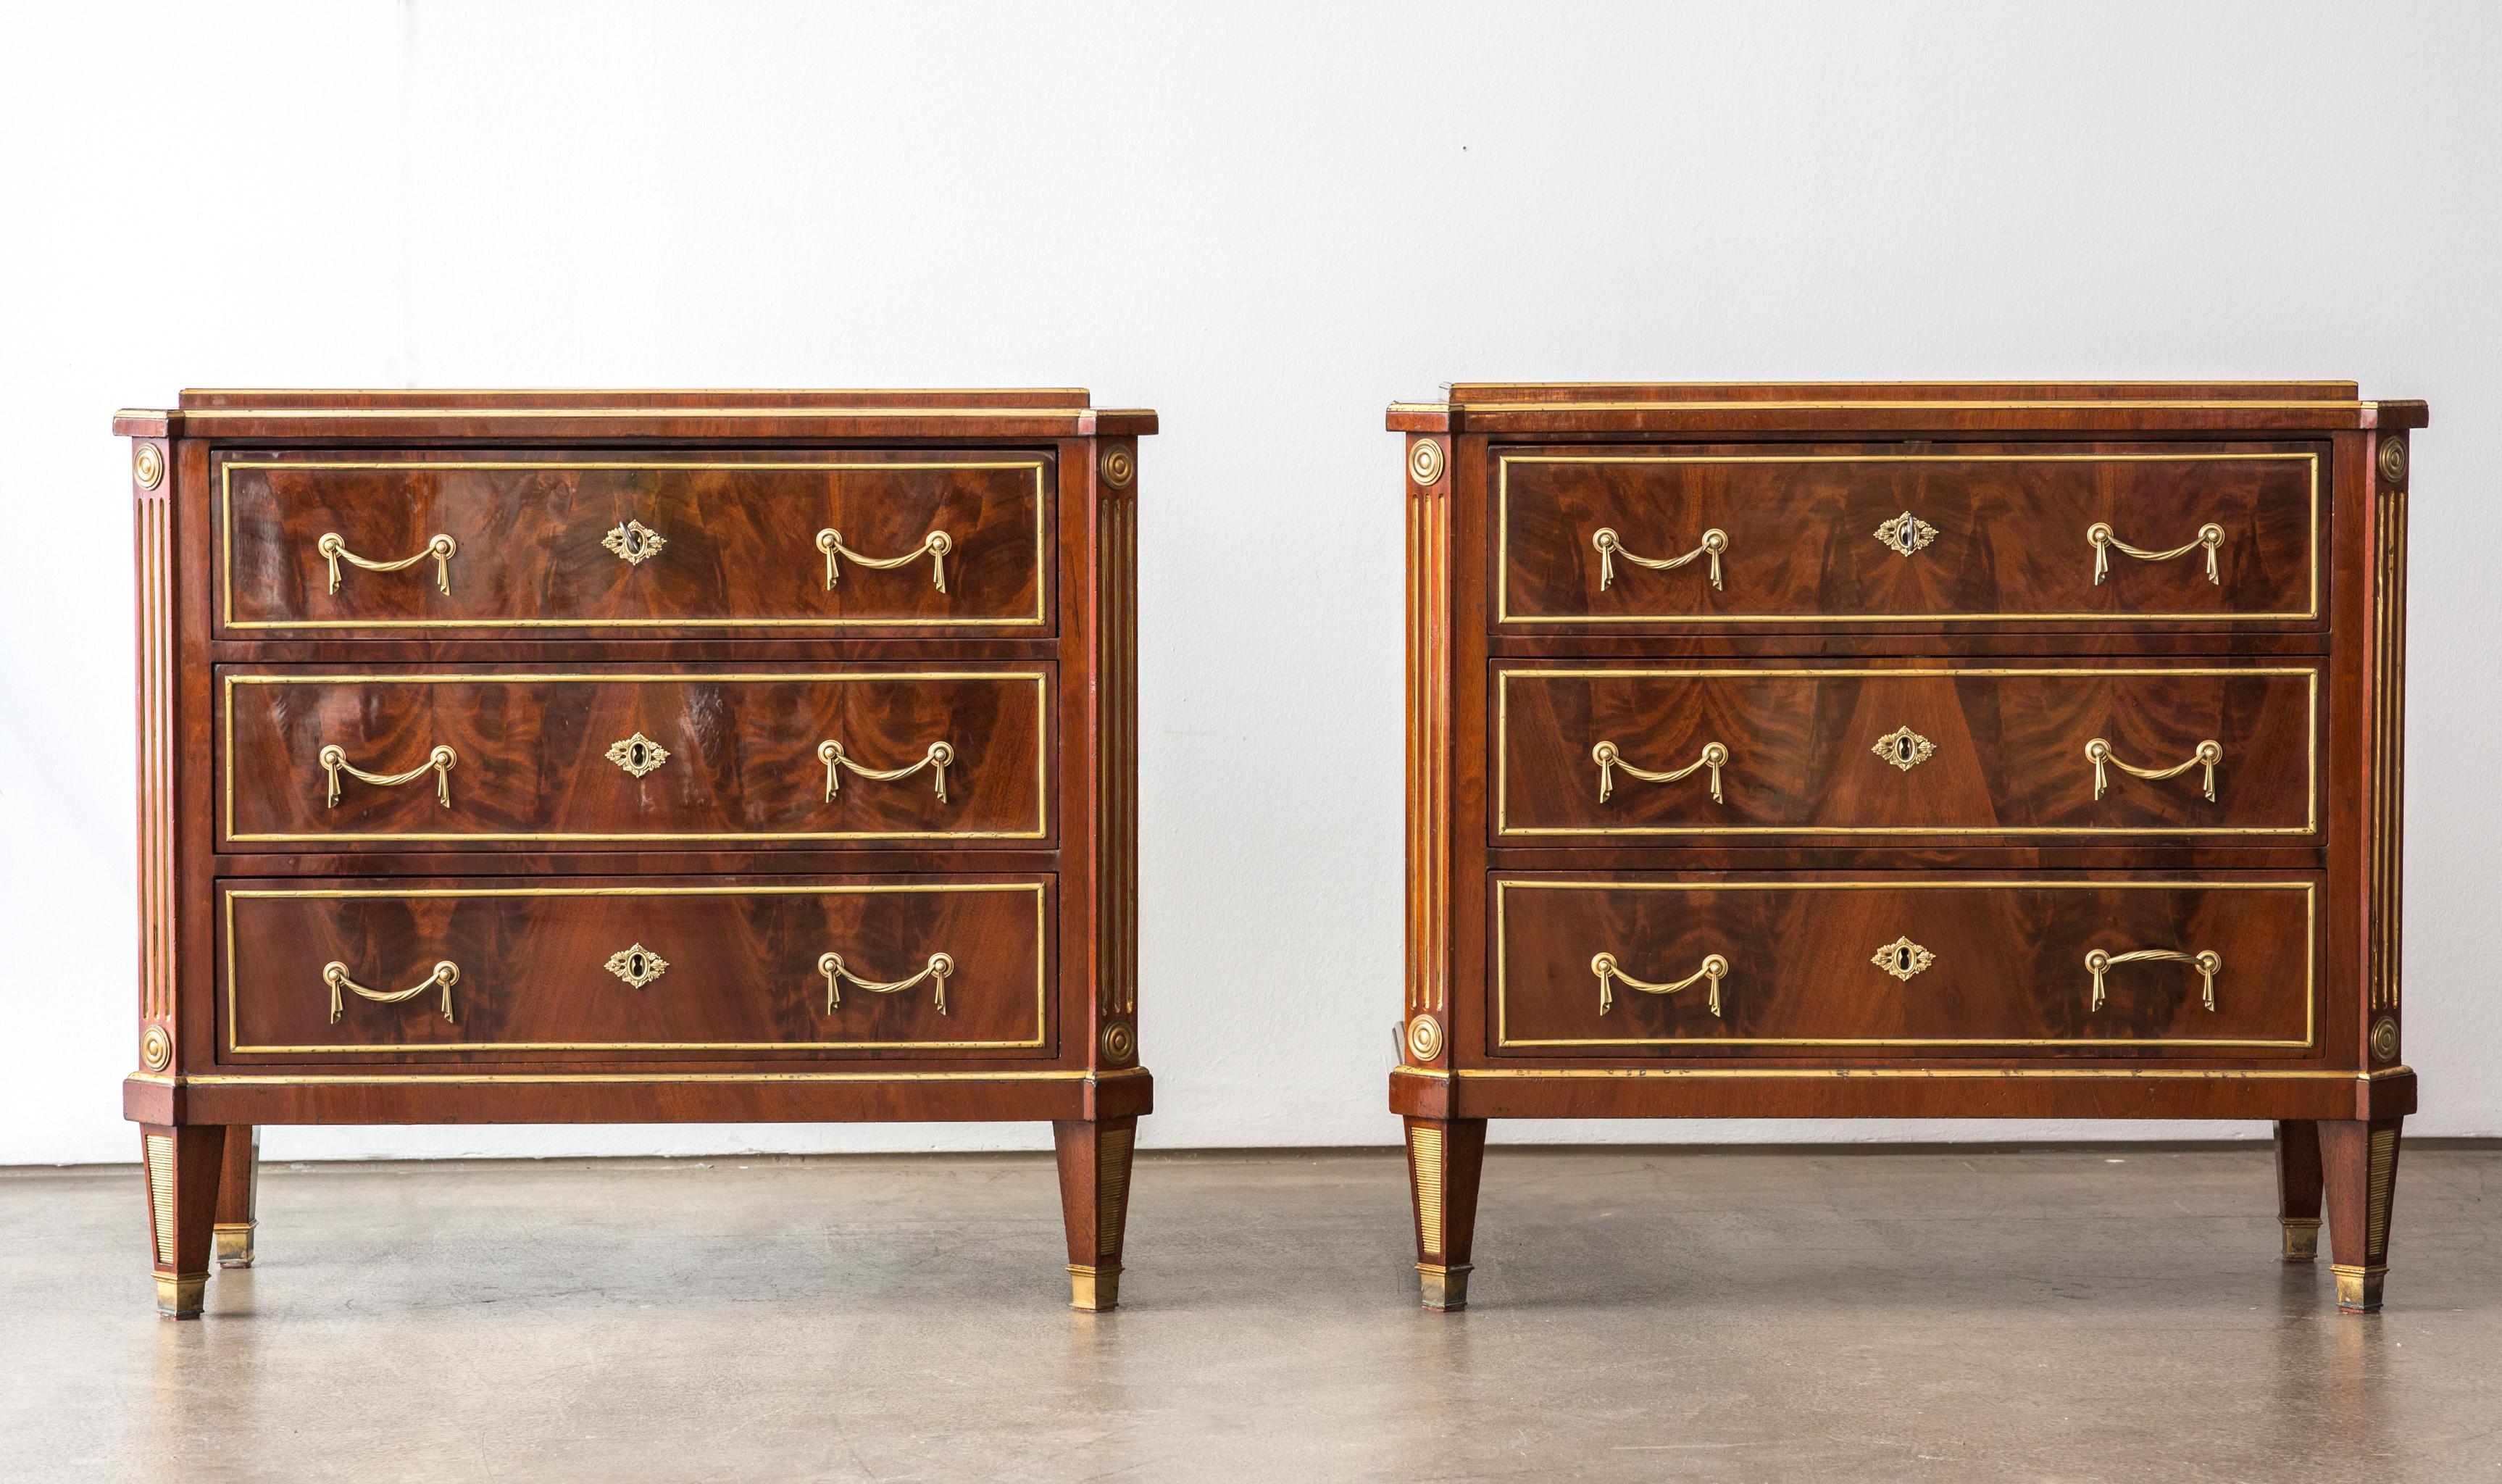 An original antique pair of neoclassical chests of drawers from the early 19th century from Russia.
The commodes are made from Mahogany veneer and decorated with brass lasts and fittings.

Each chest has three drawers, which are veneered with